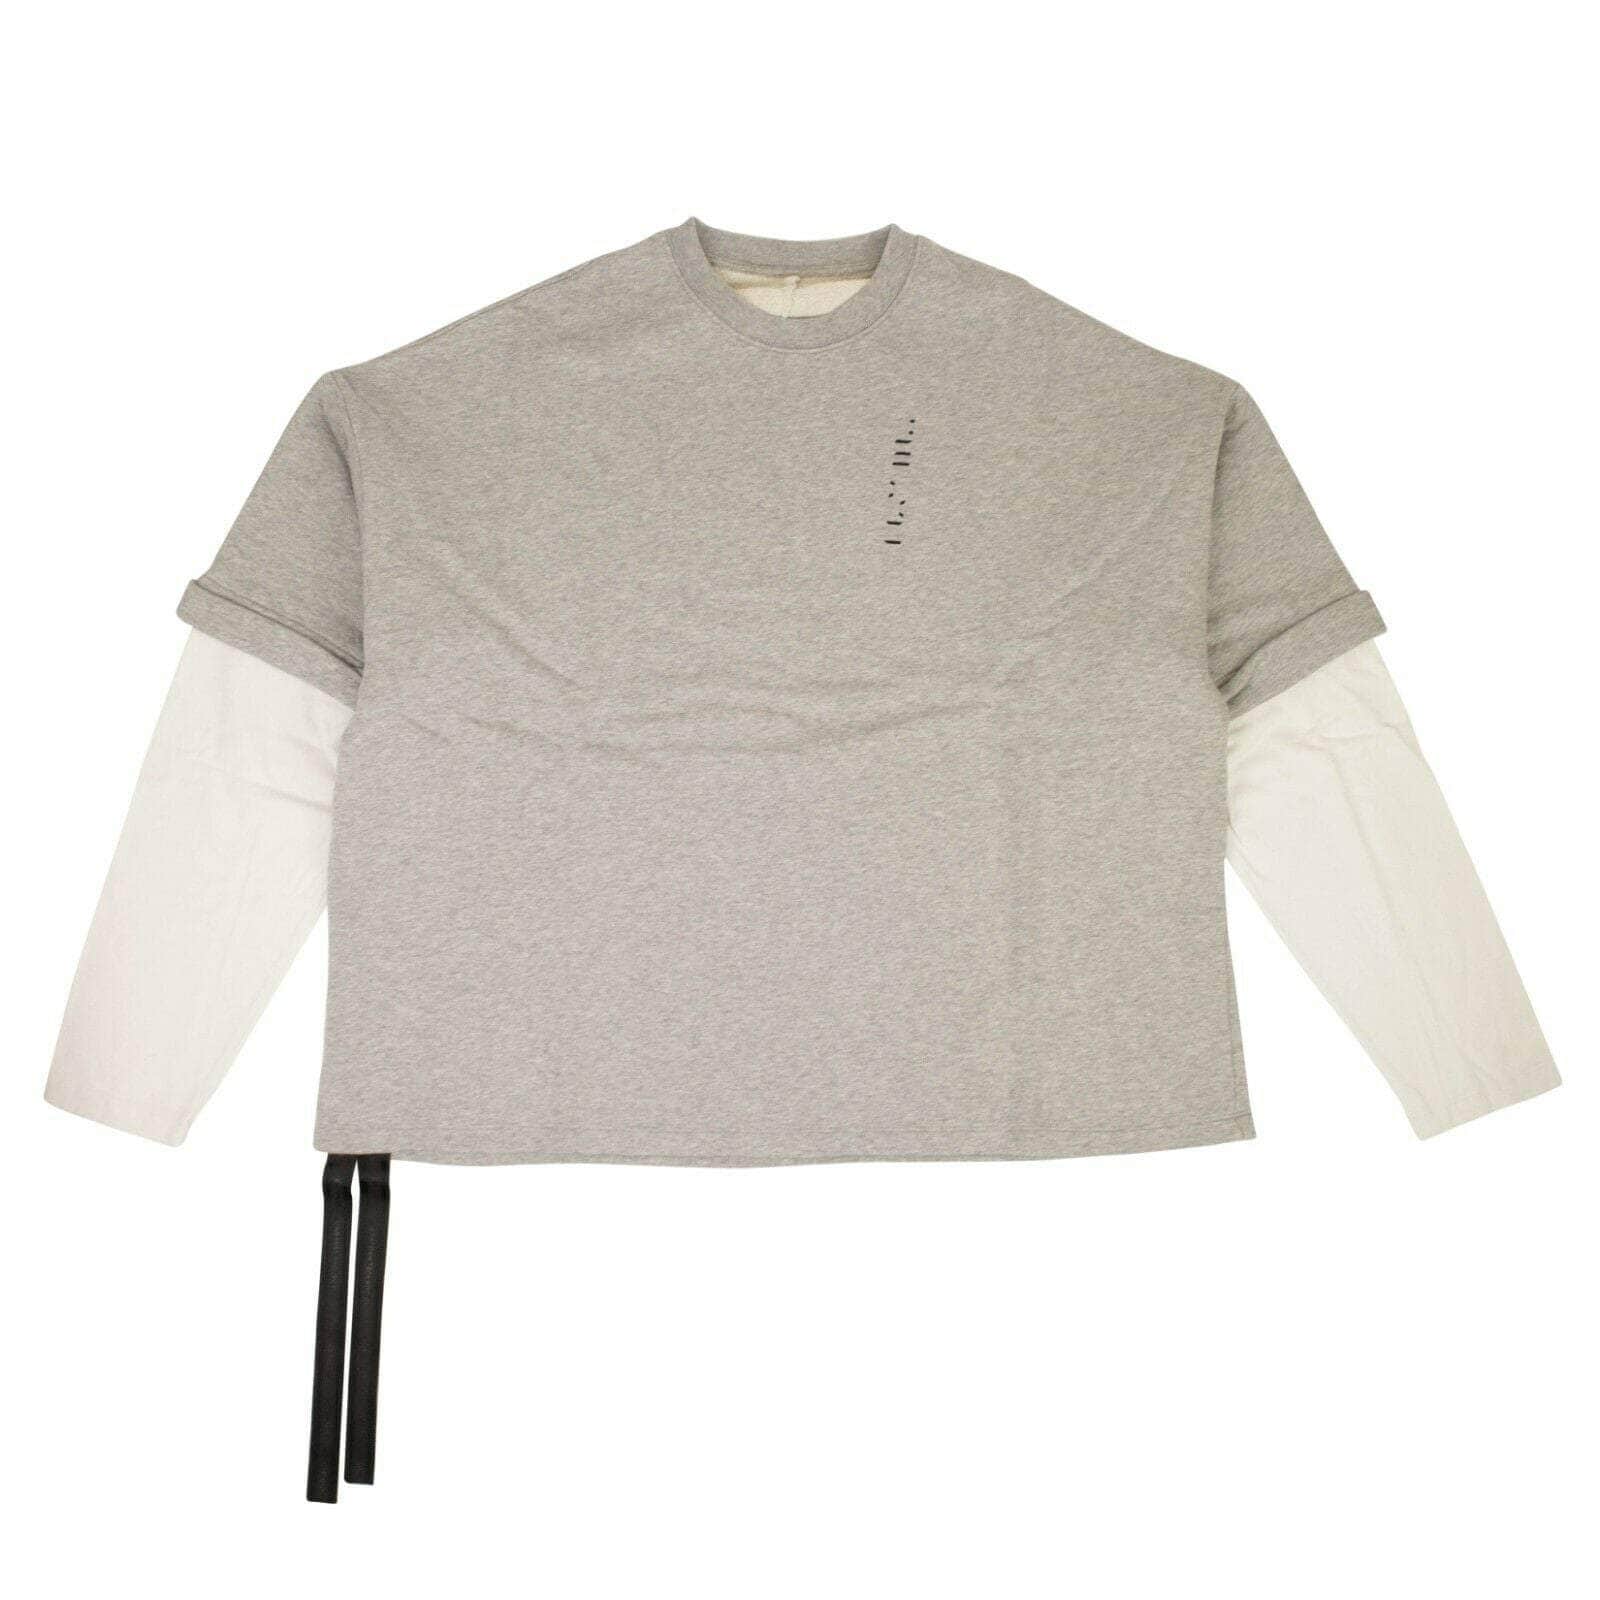 Unravel Project channelenable-all, chicmi, couponcollection, gender-mens, main-clothing, size-m, size-s, size-xs, under-250, unravel-project Gray Layered Long Sleeve Sweashirt